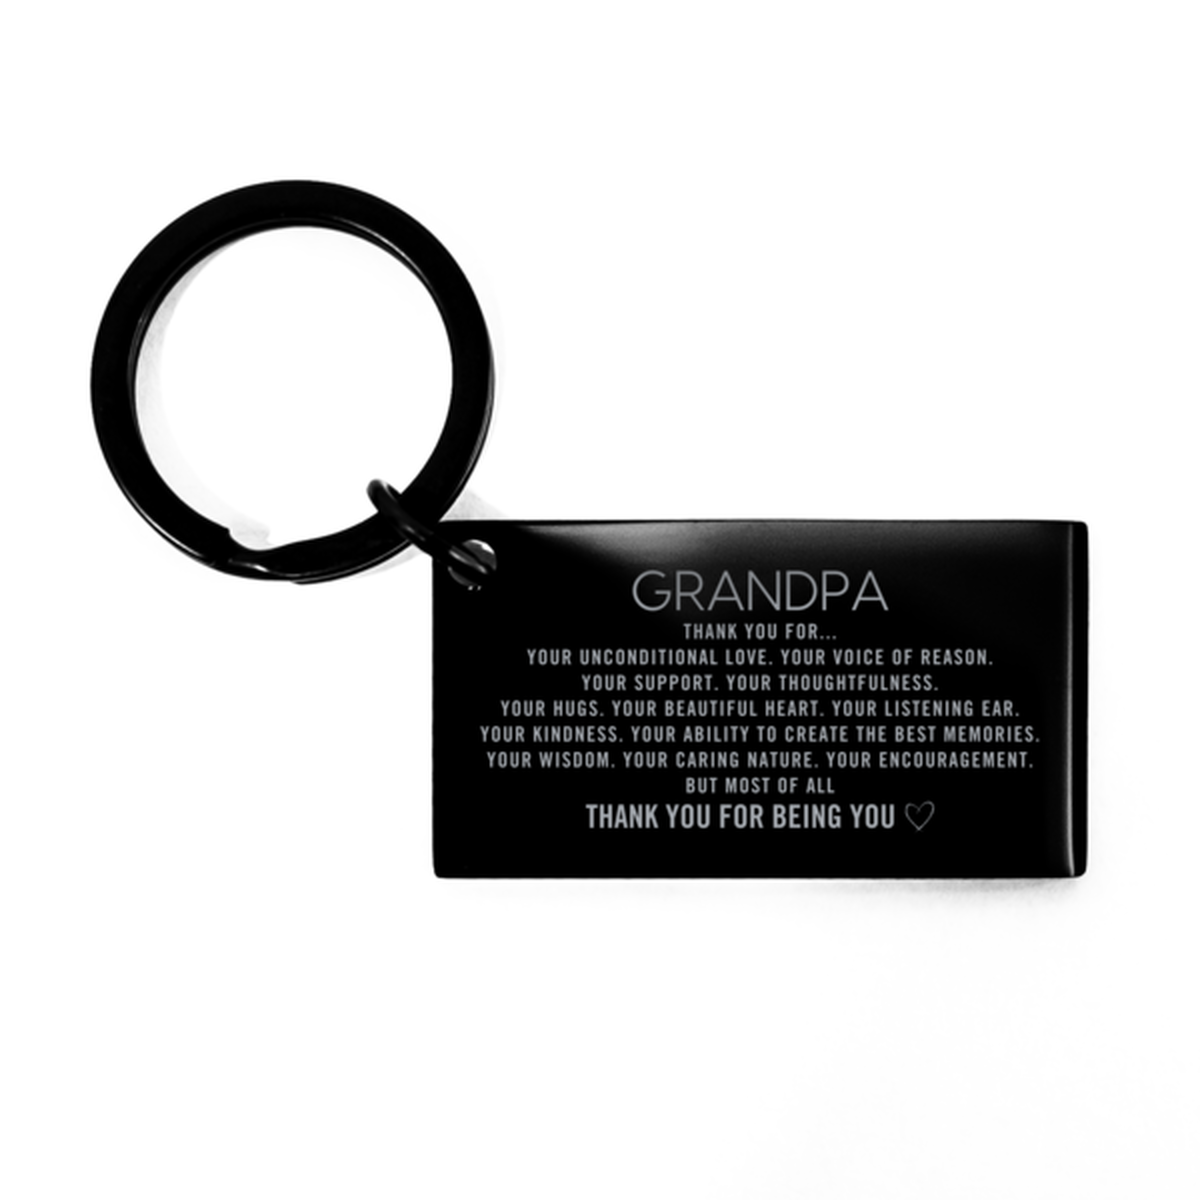 Grandpa Keychain Custom, Engraved Gifts For Grandpa Christmas Graduation Birthday Gifts for Men Women Grandpa Thank you for Your unconditional love